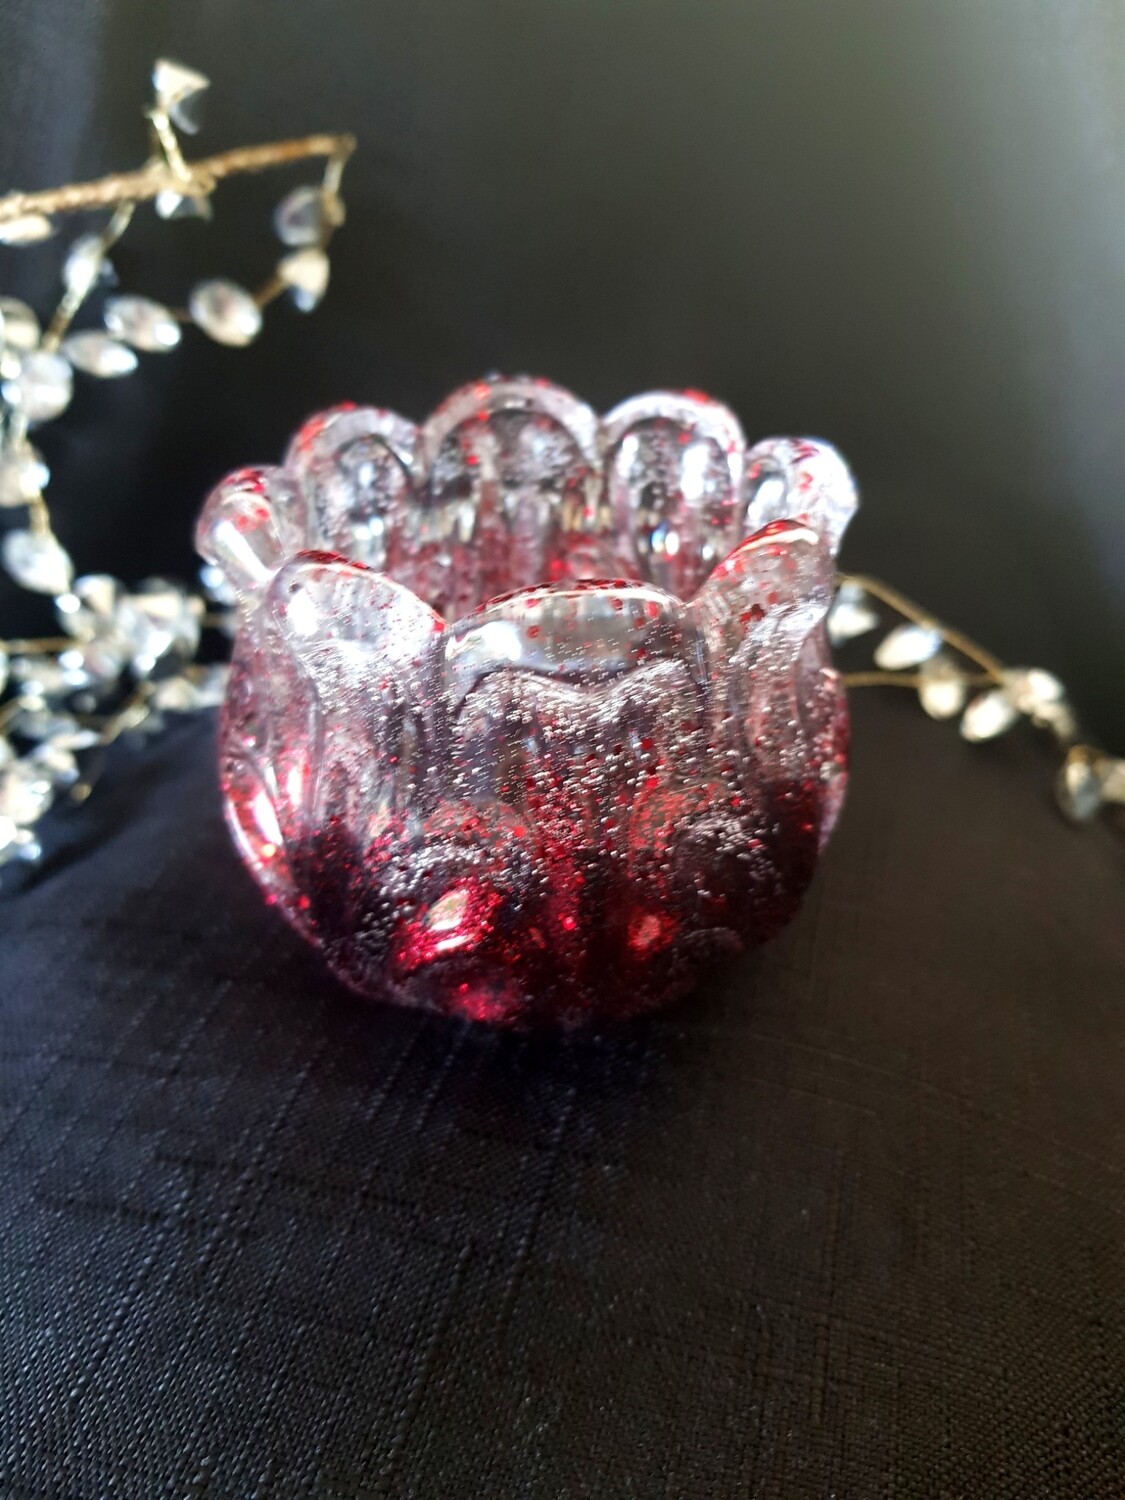 Red/clear "In memory of" candle holder/vase